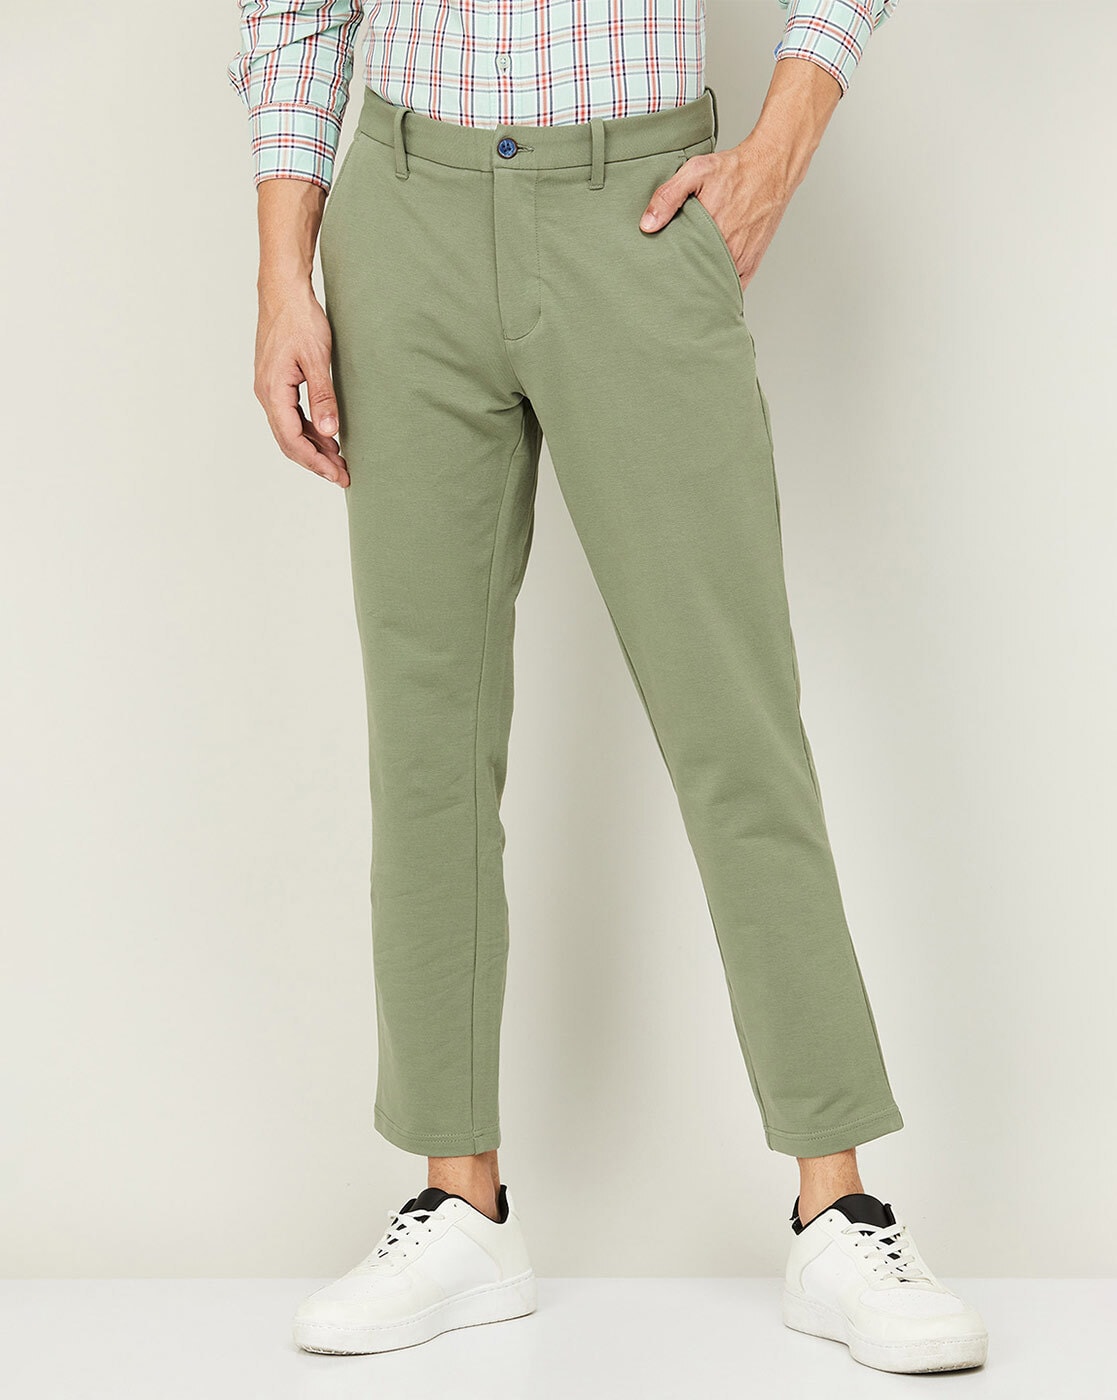 US POLO ASSN Casual Trousers  Buy US POLO ASSN Men Light Olive  Regular Fit Printed Casual Trousers Online  Nykaa Fashion